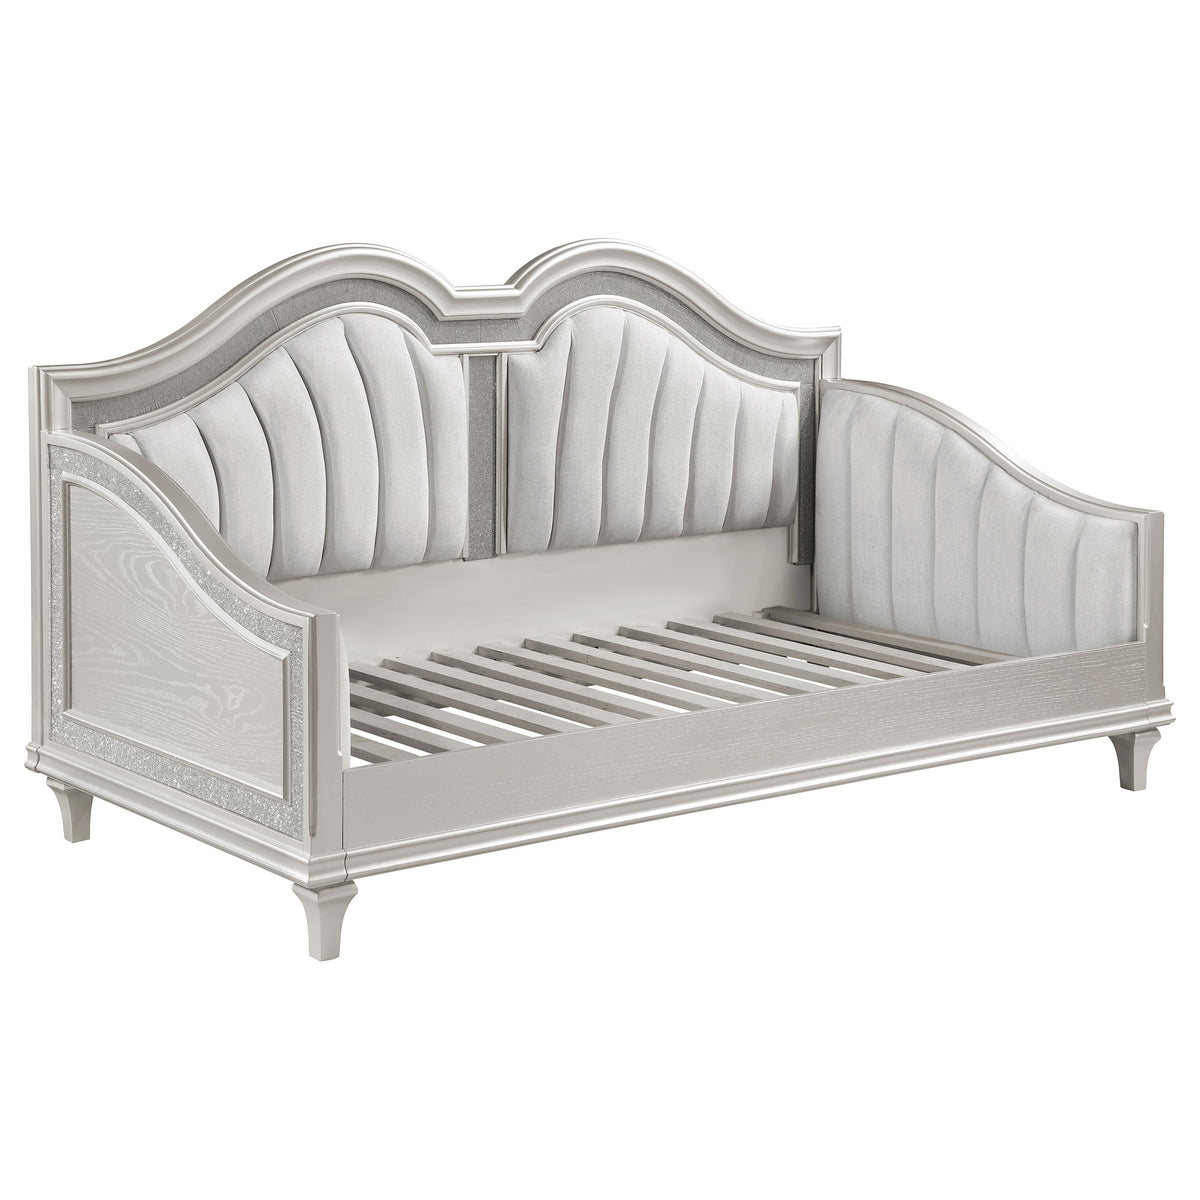 Evangeline Upholstered Twin Daybed with Faux Diamond Trim Silver and Ivory Evangeline Upholstered Twin Daybed with Faux Diamond Trim Silver and Ivory Half Price Furniture